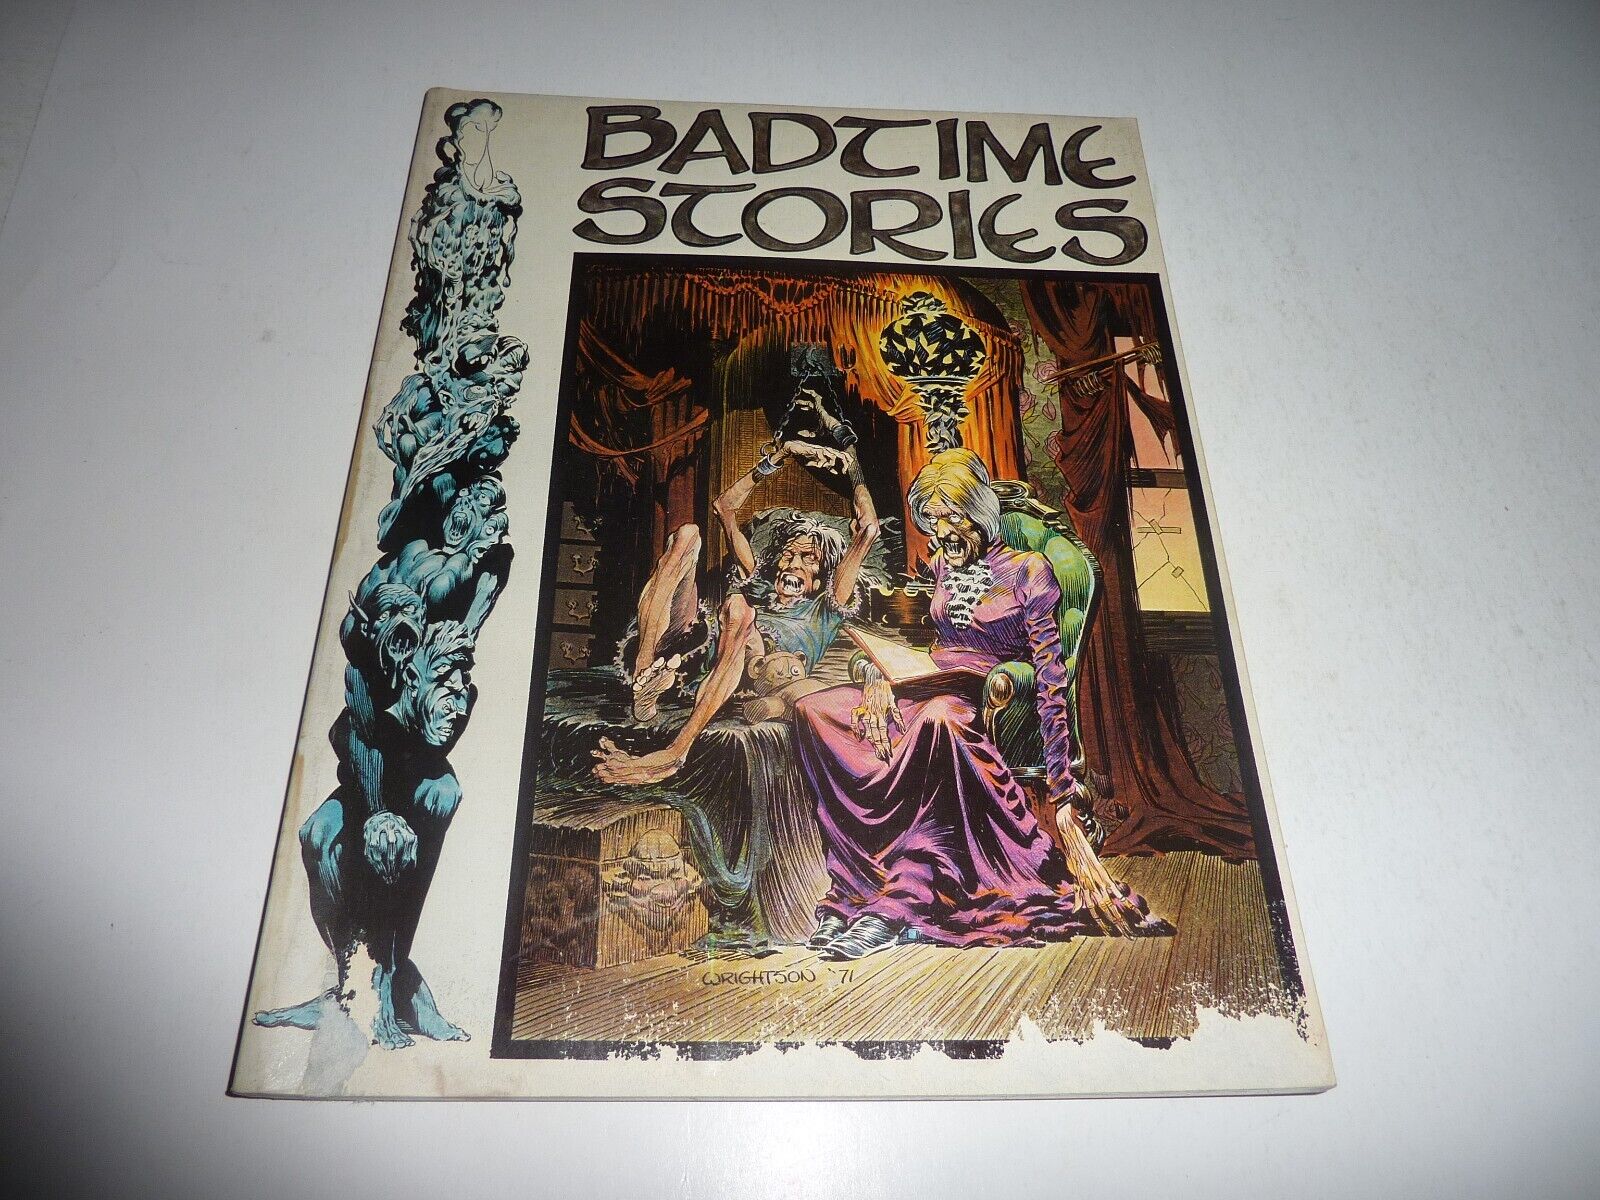 BADTIME STORIES Berni Wrightson Graphic Masters 1971 Low Grade Reader Copy